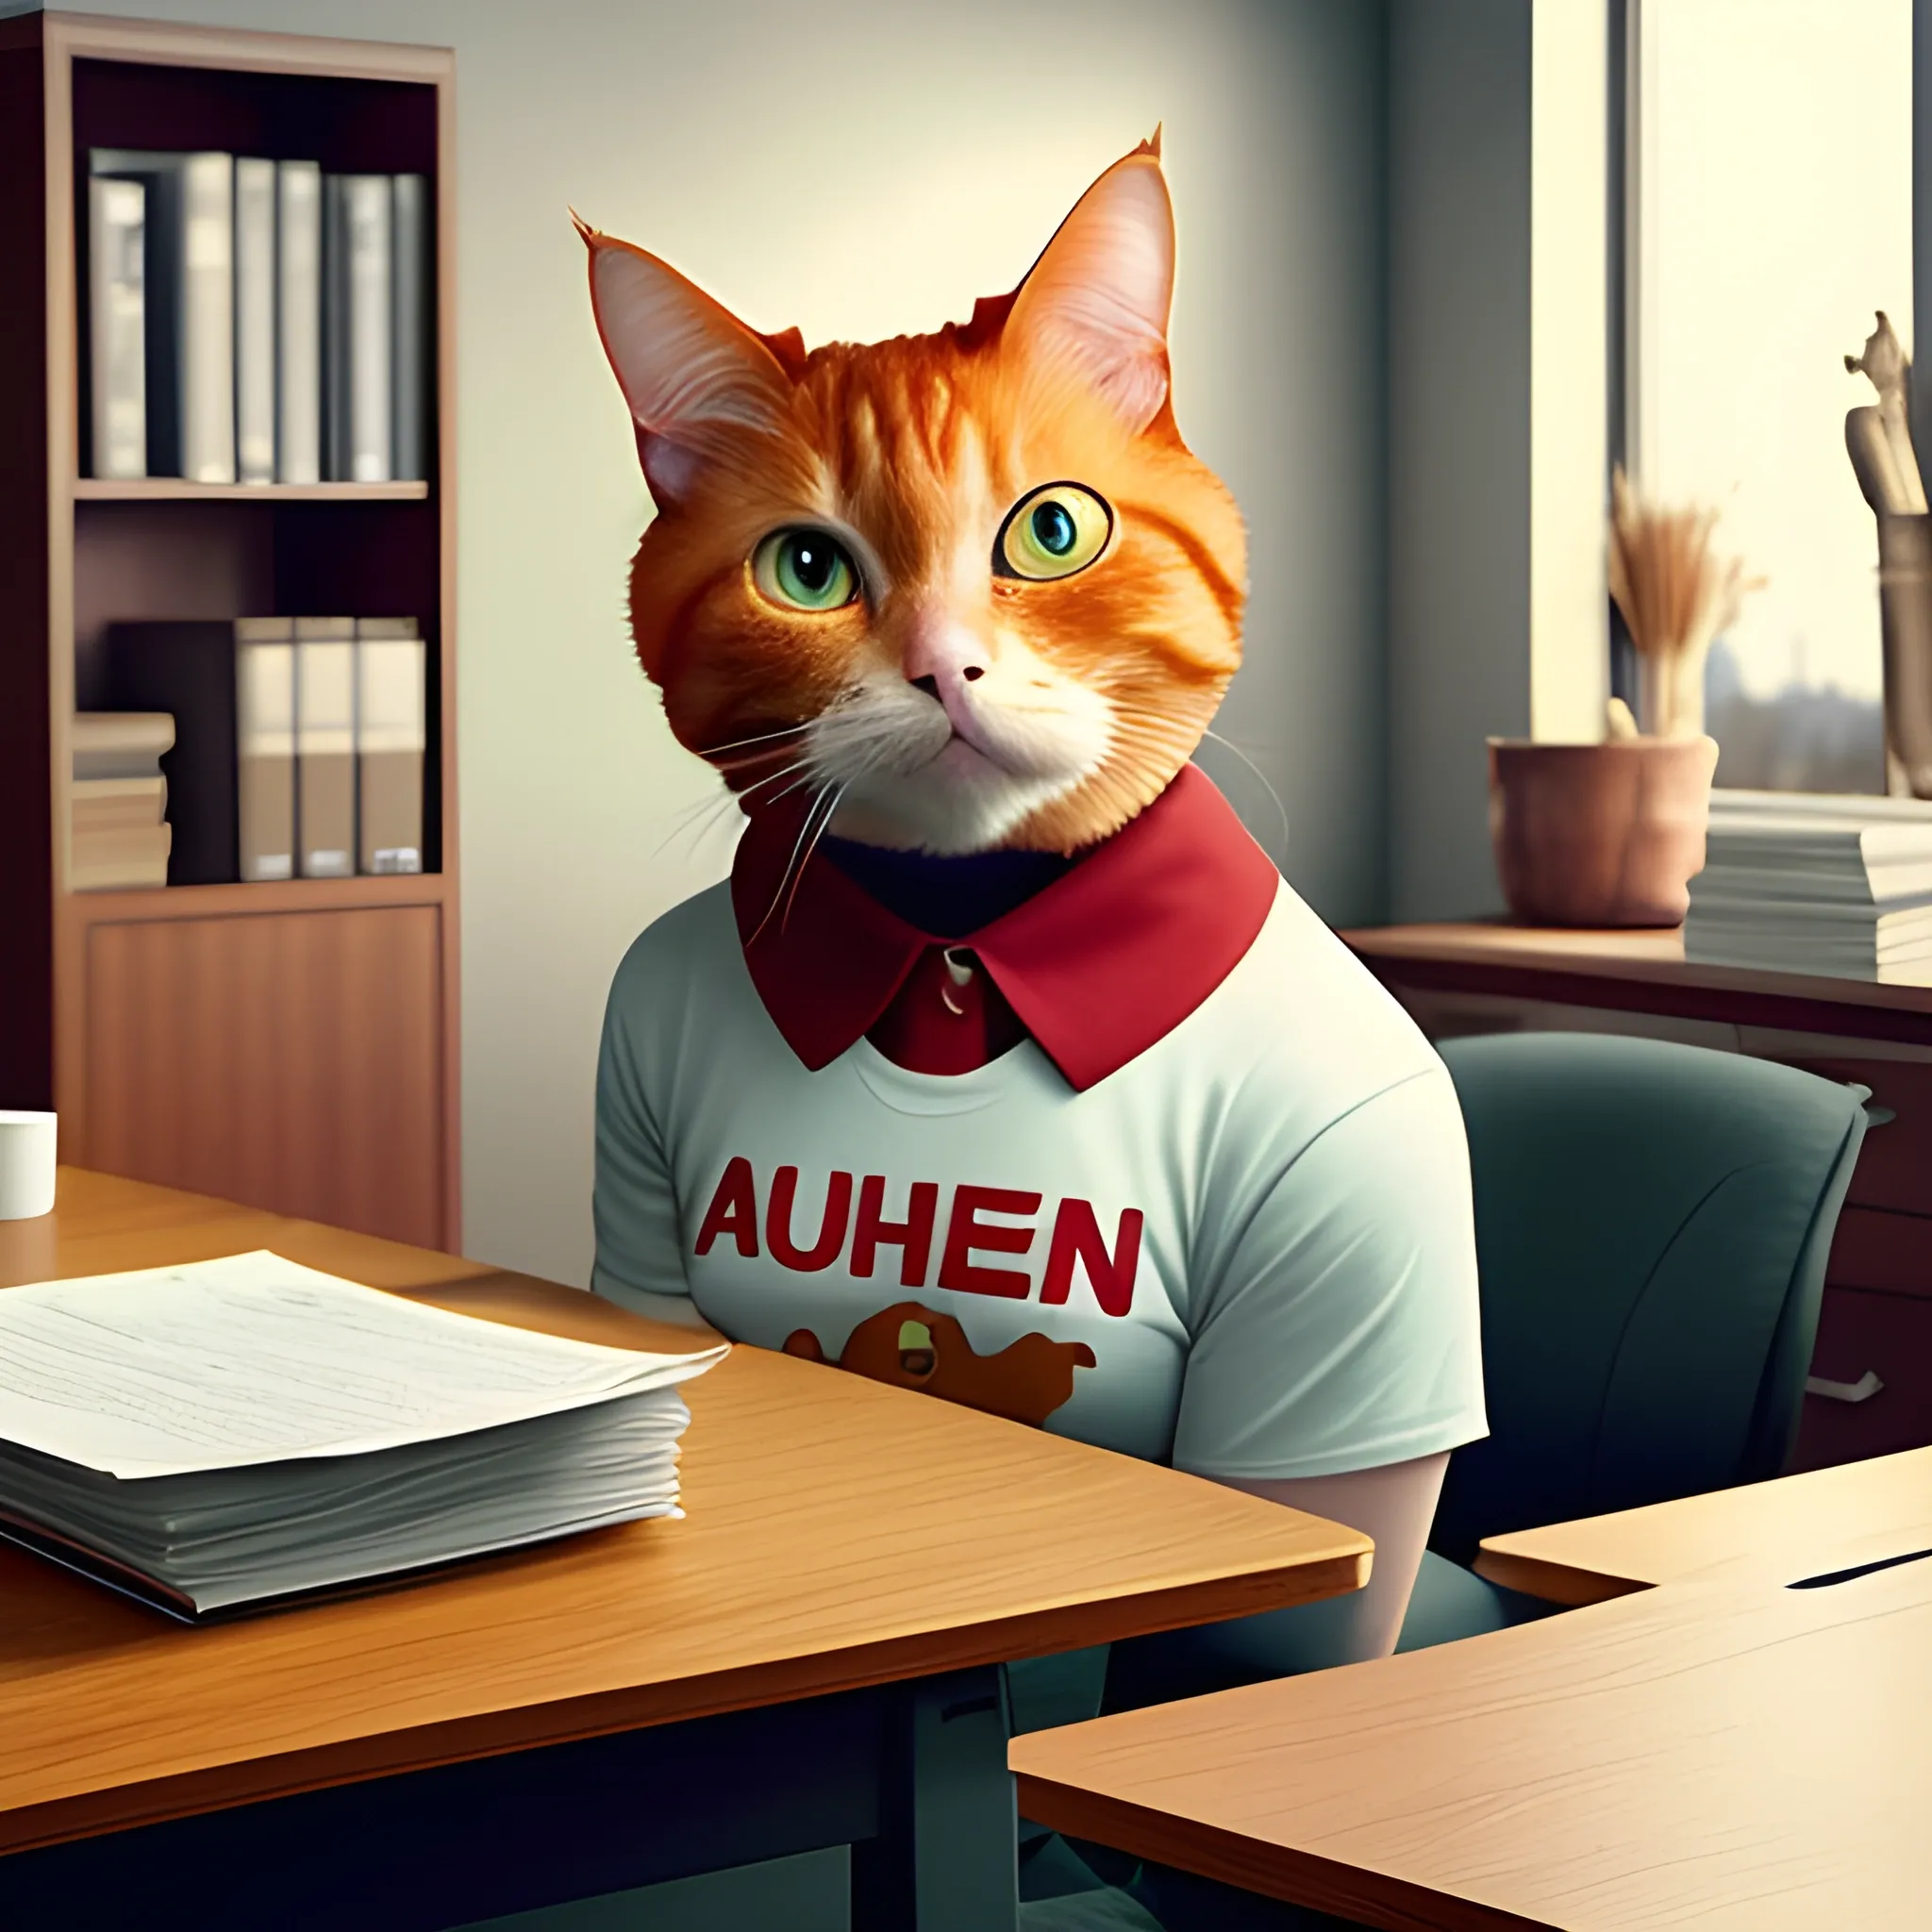 a ginger cat  in a classroom with a surprised or alarmed expression. There's a red stain on the cat's shirt, indicating a spill. The classroom has desks with scattered papers, and the children in the background also seem surprised or shocked. Surreal photography style, ultra-realistic details.